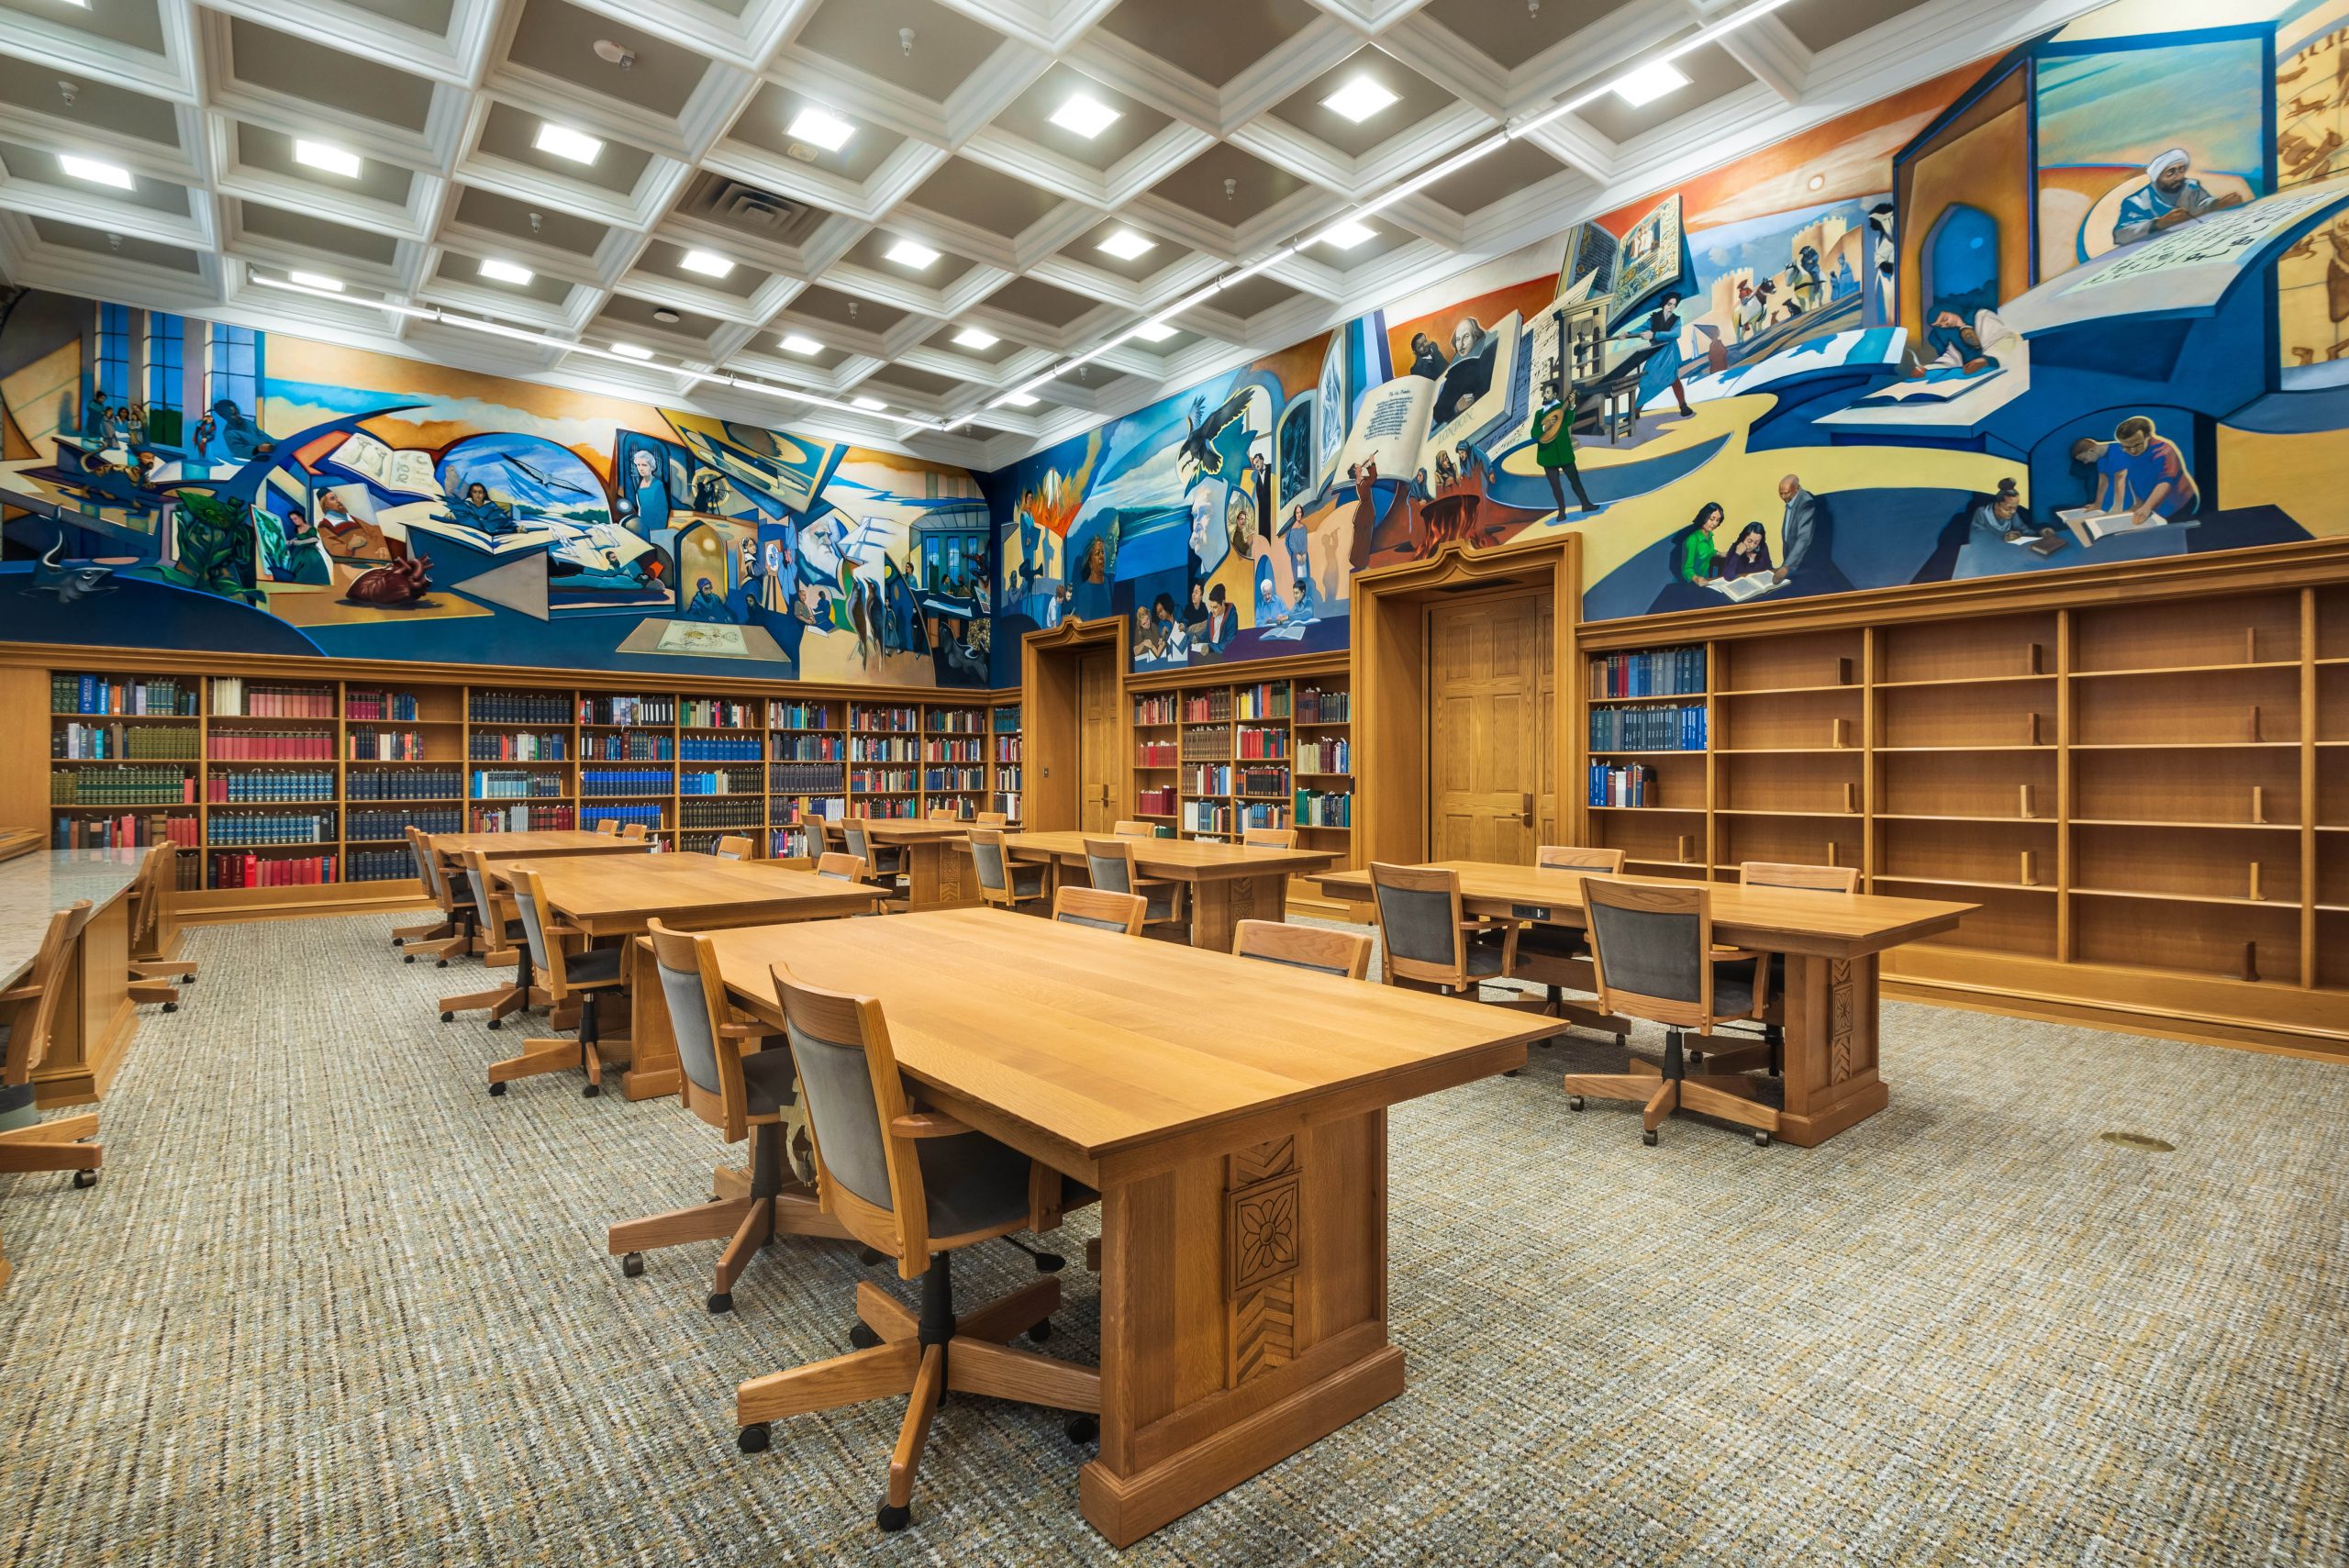 The Lilly Library Bicentennial Murals Project of Indiana University